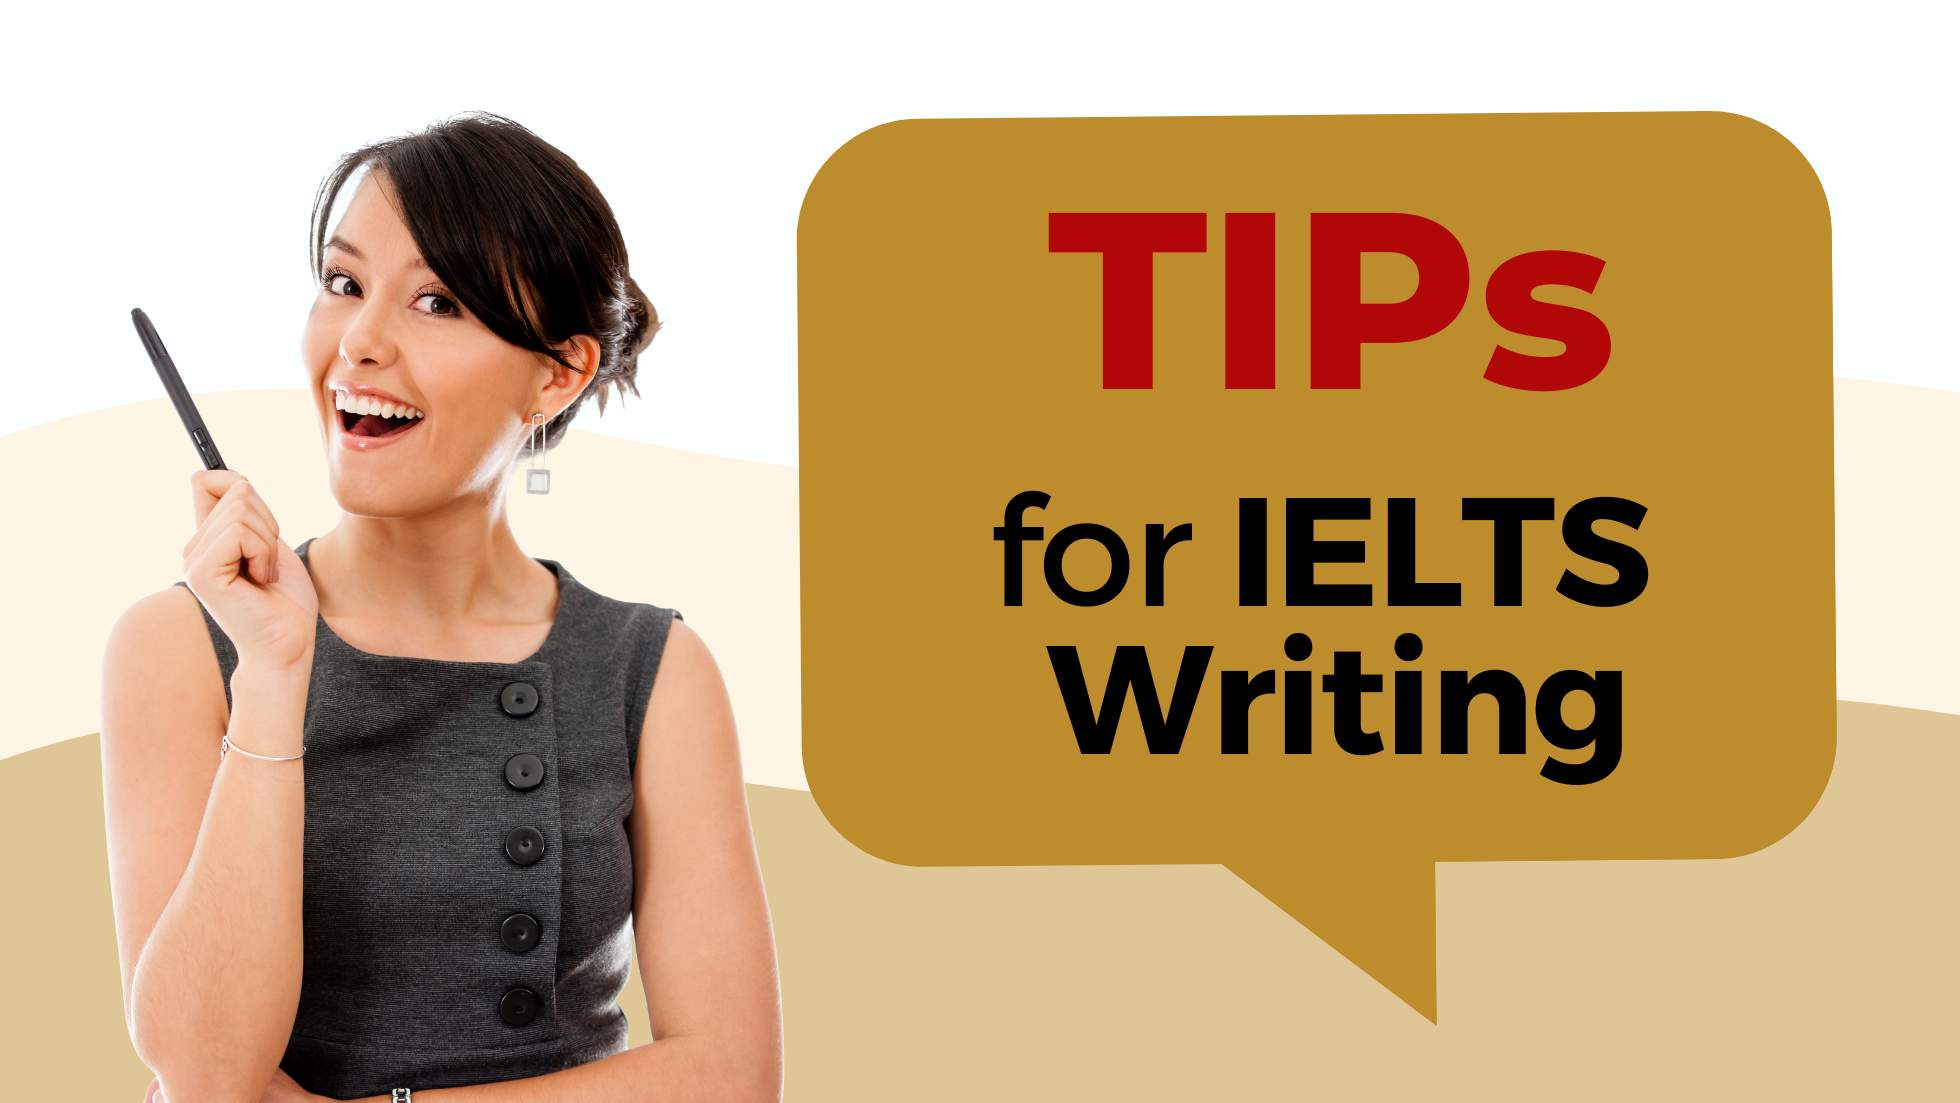 TIPs for IELTS Writing